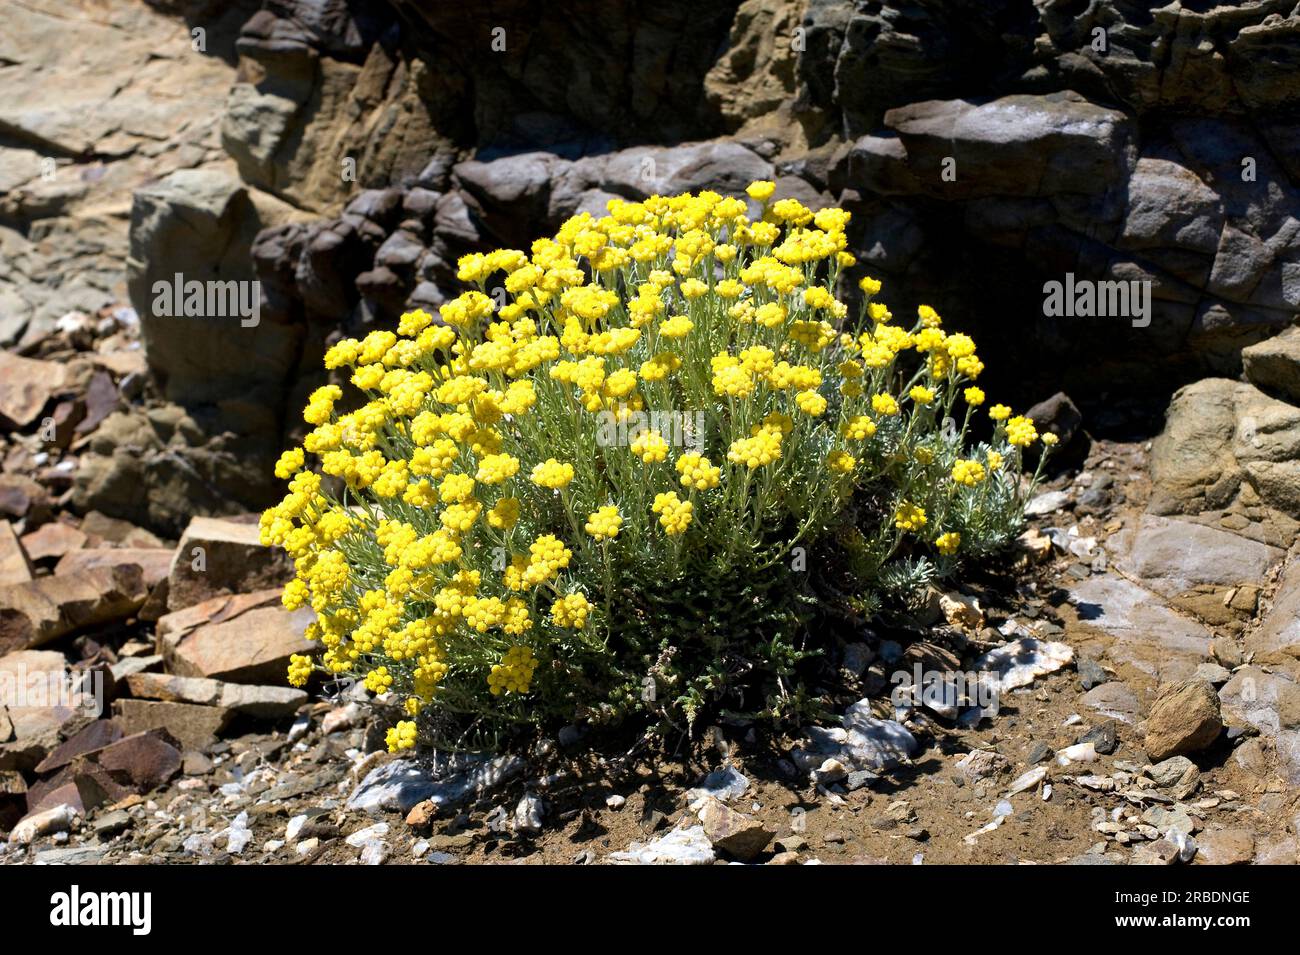 Perpetual or everlasting (Helichrysum stoechas) is an herb native to coastals of the Mediterranean region. Angiosperms. Asteraceae. This photo was tak Stock Photo